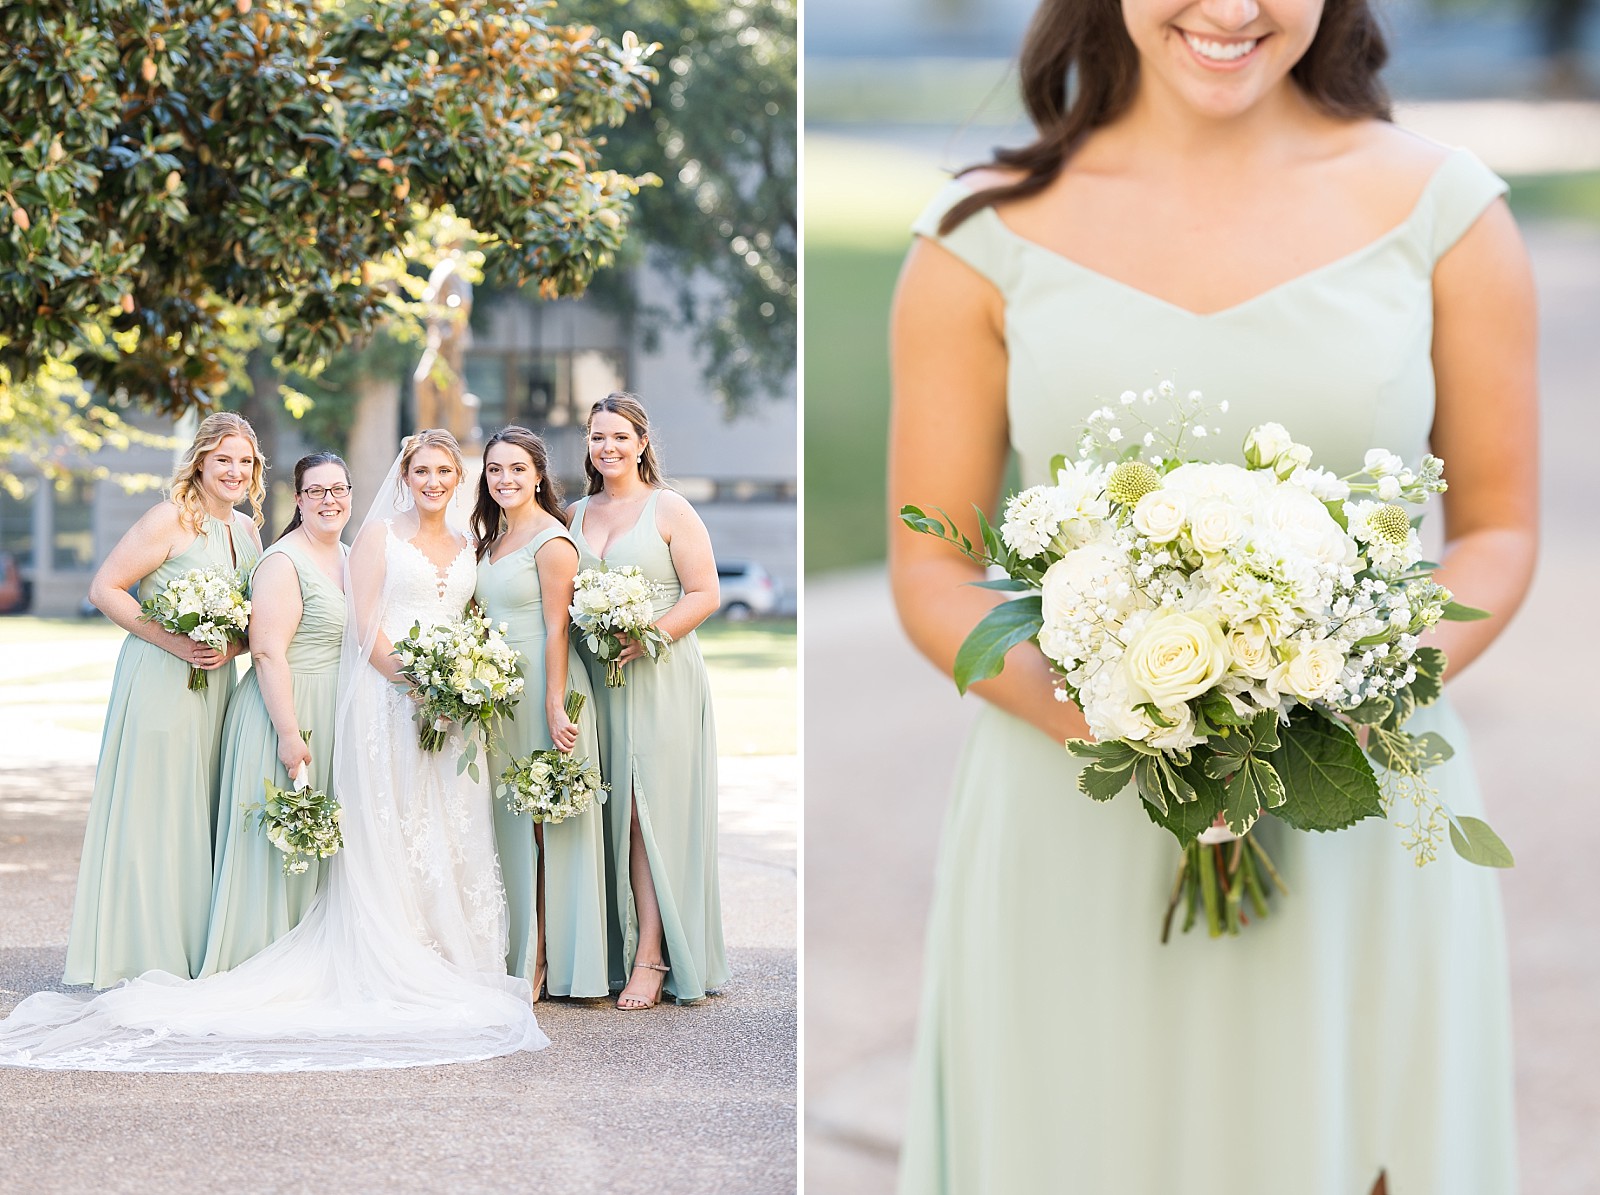 Bridesmaid with all white bouquet | Raleigh Wedding Photographer Sarah Hinckley